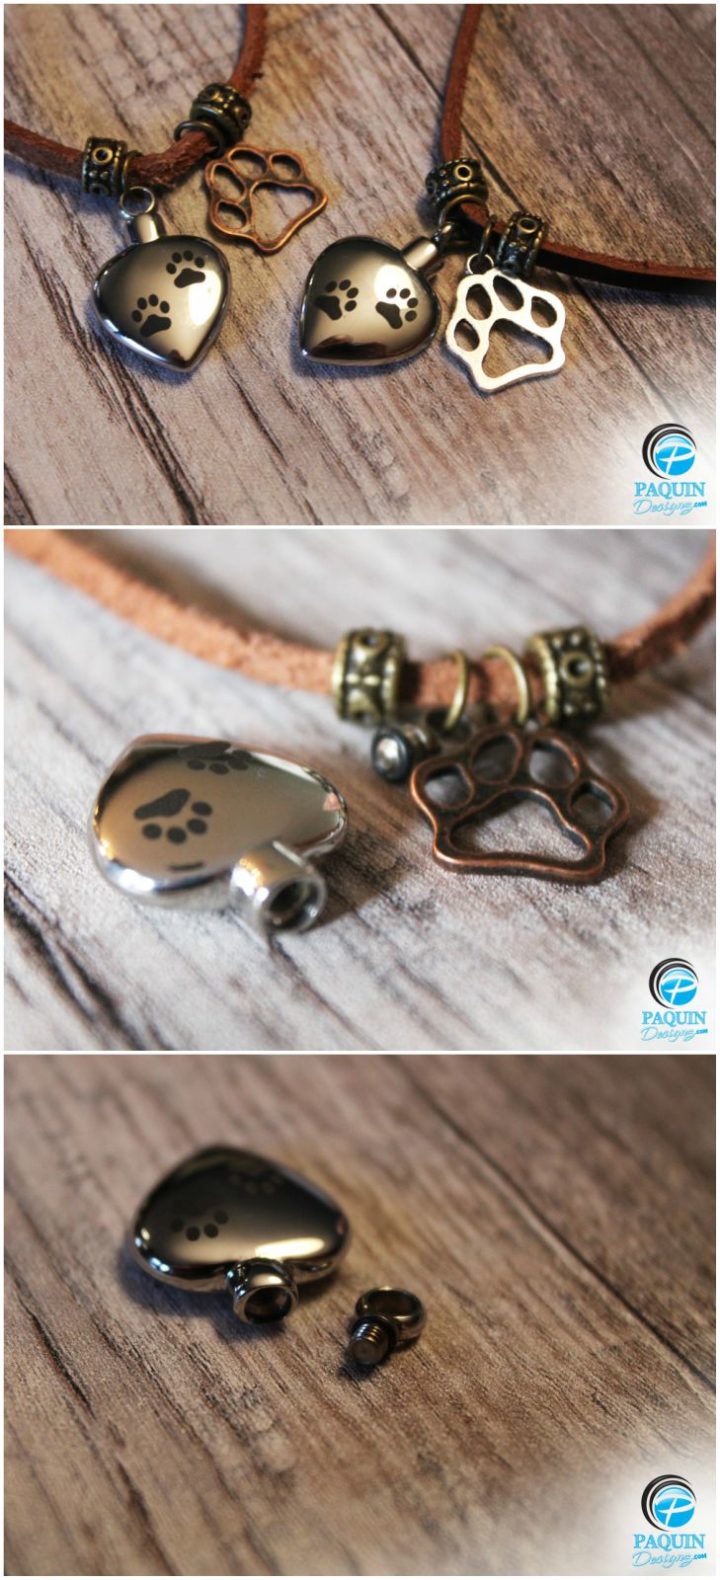 9 Pet Memorial Gifts - Pet cremation jewelry such as cremation necklaces hold your pet's ashes in a beautiful pendant.